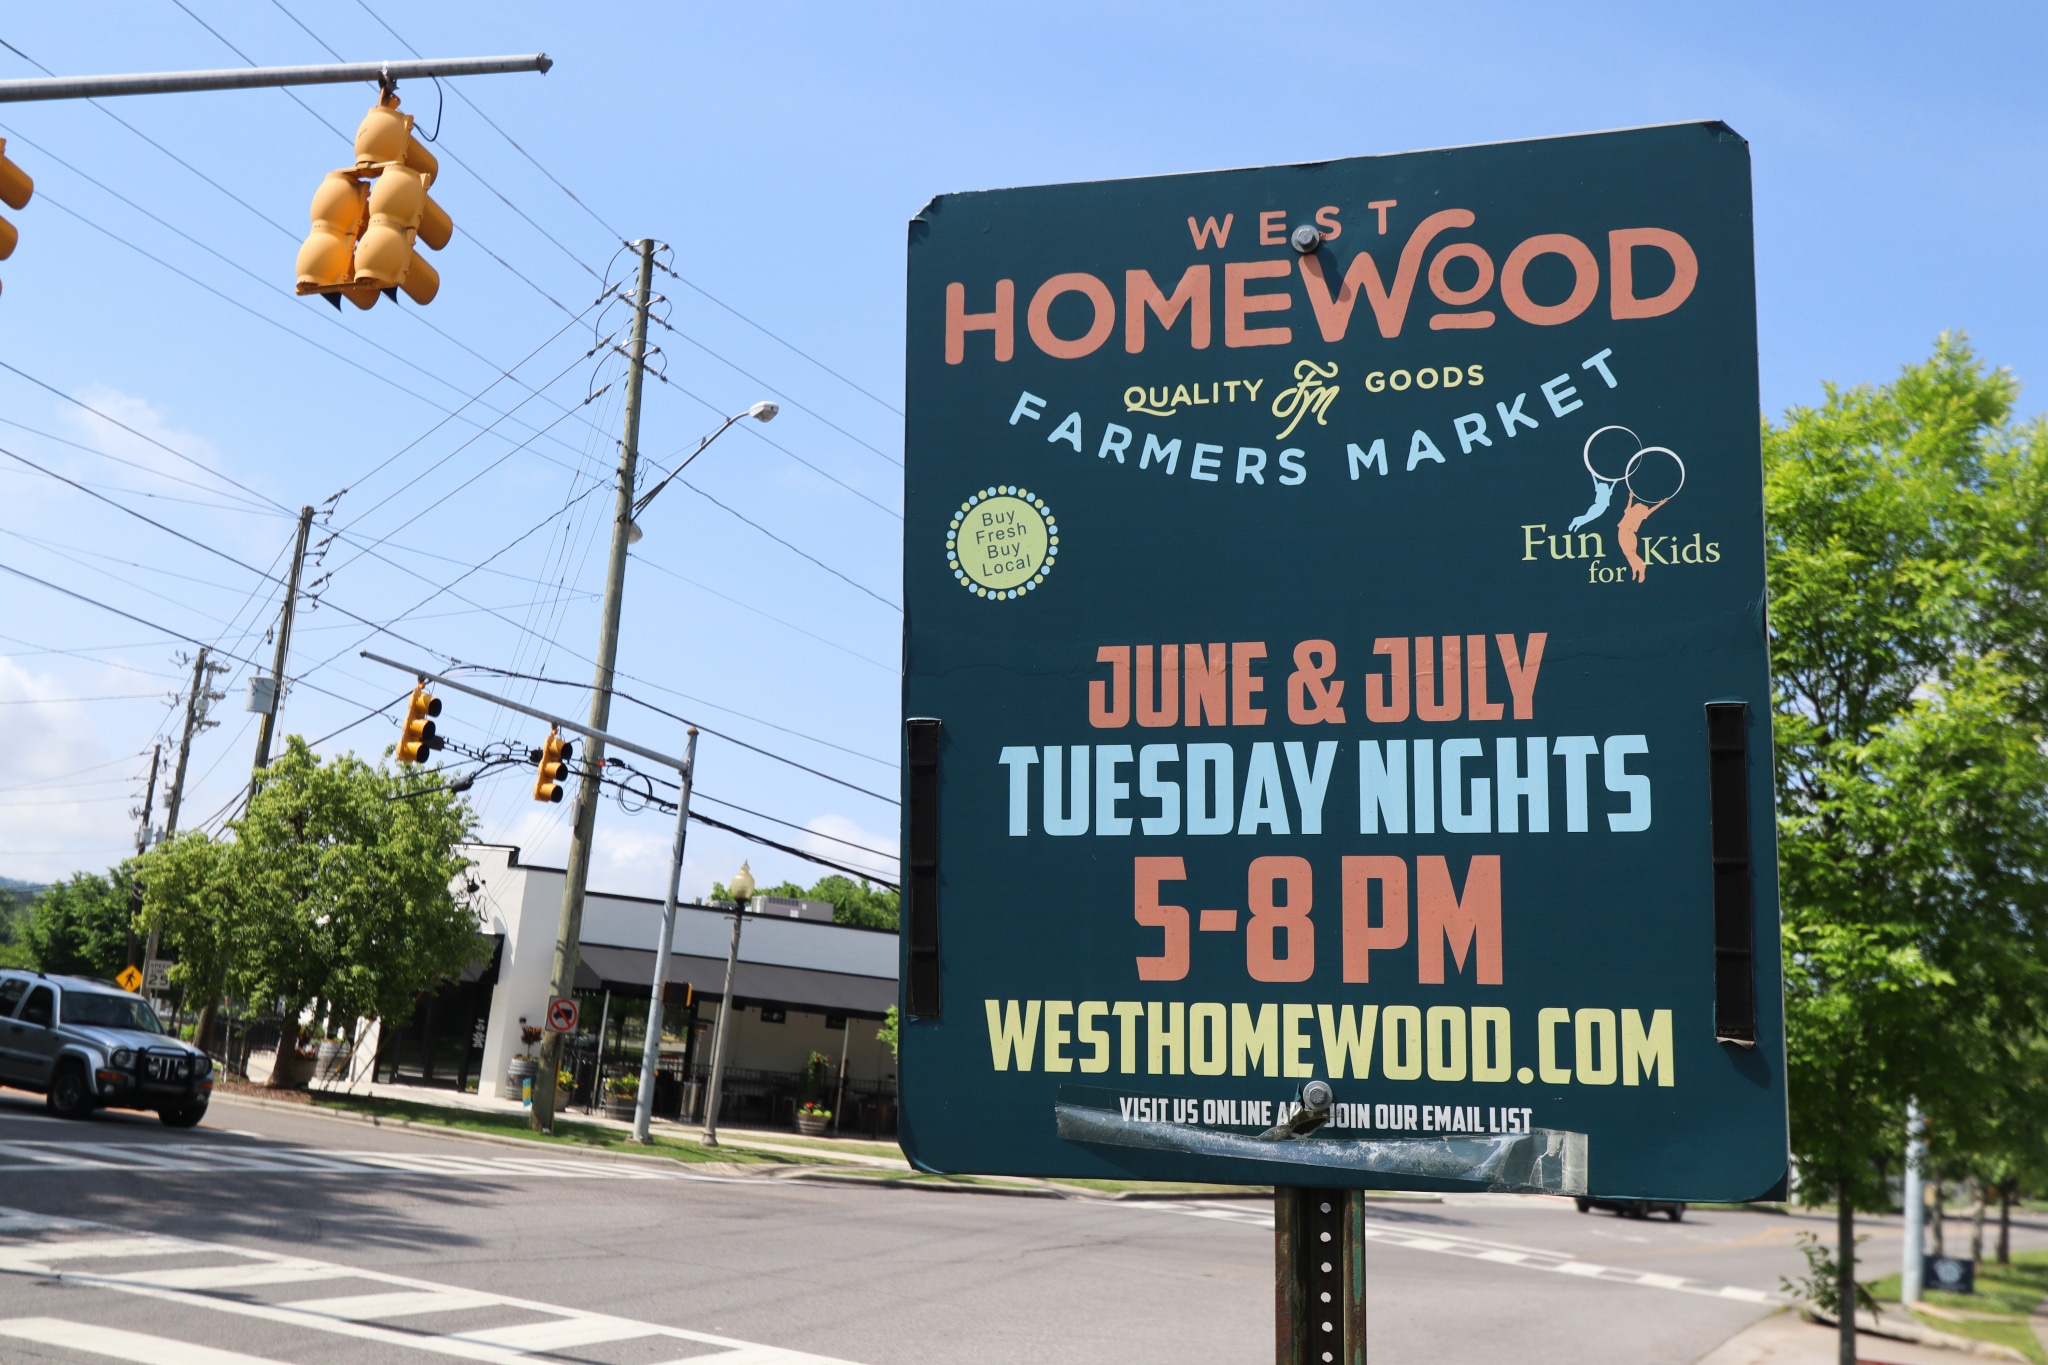 West Homewood Farmers Market sign. (Photo by Christine Hull for Bham Now)